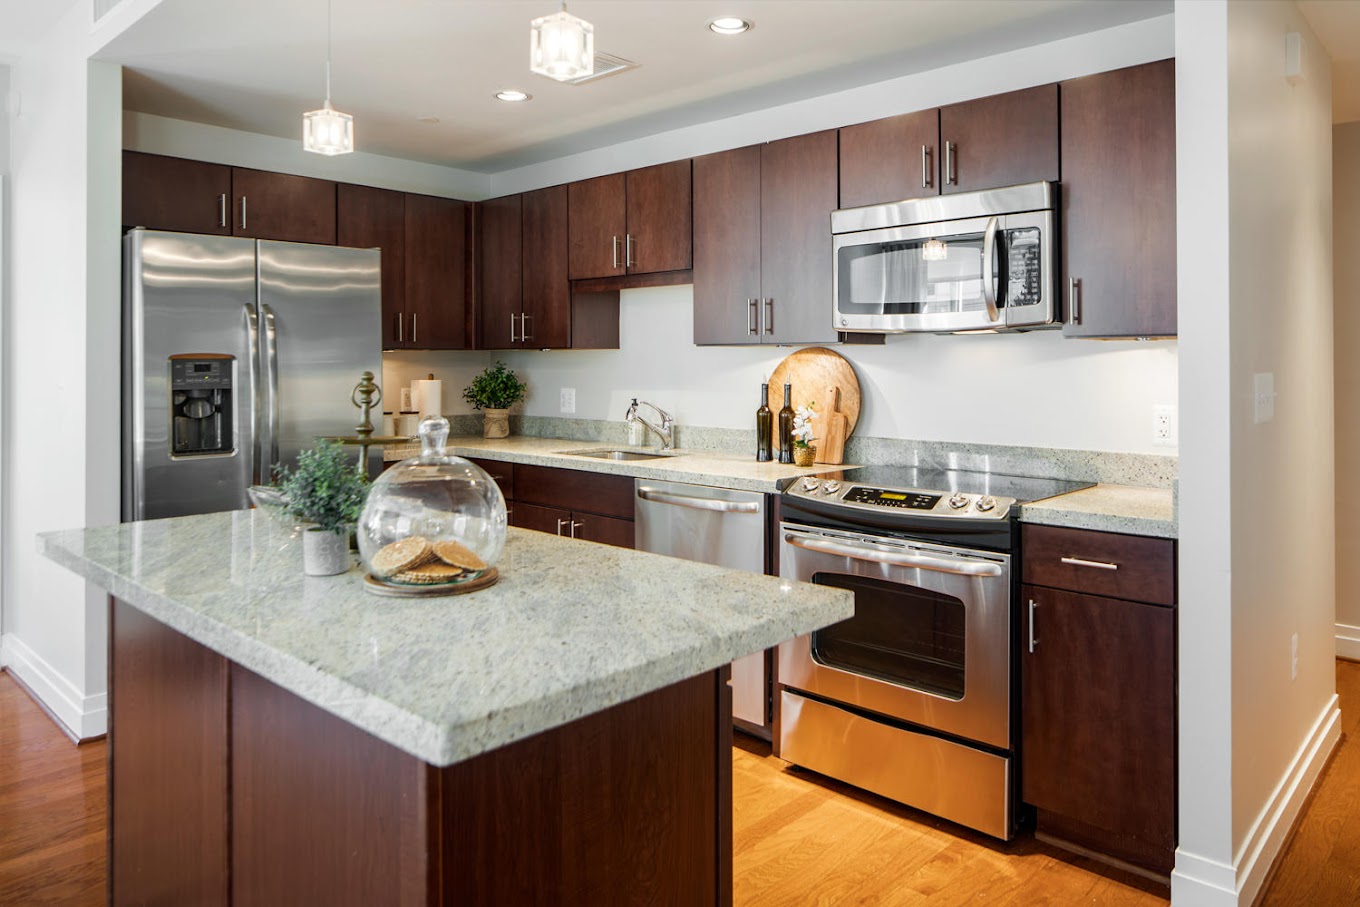 Spacious Design with Kitchen Islands, Merillat Sedona Cabinetry, GE Energy Star Stainless Steel Appliances, Kashmire White Granite Countertops